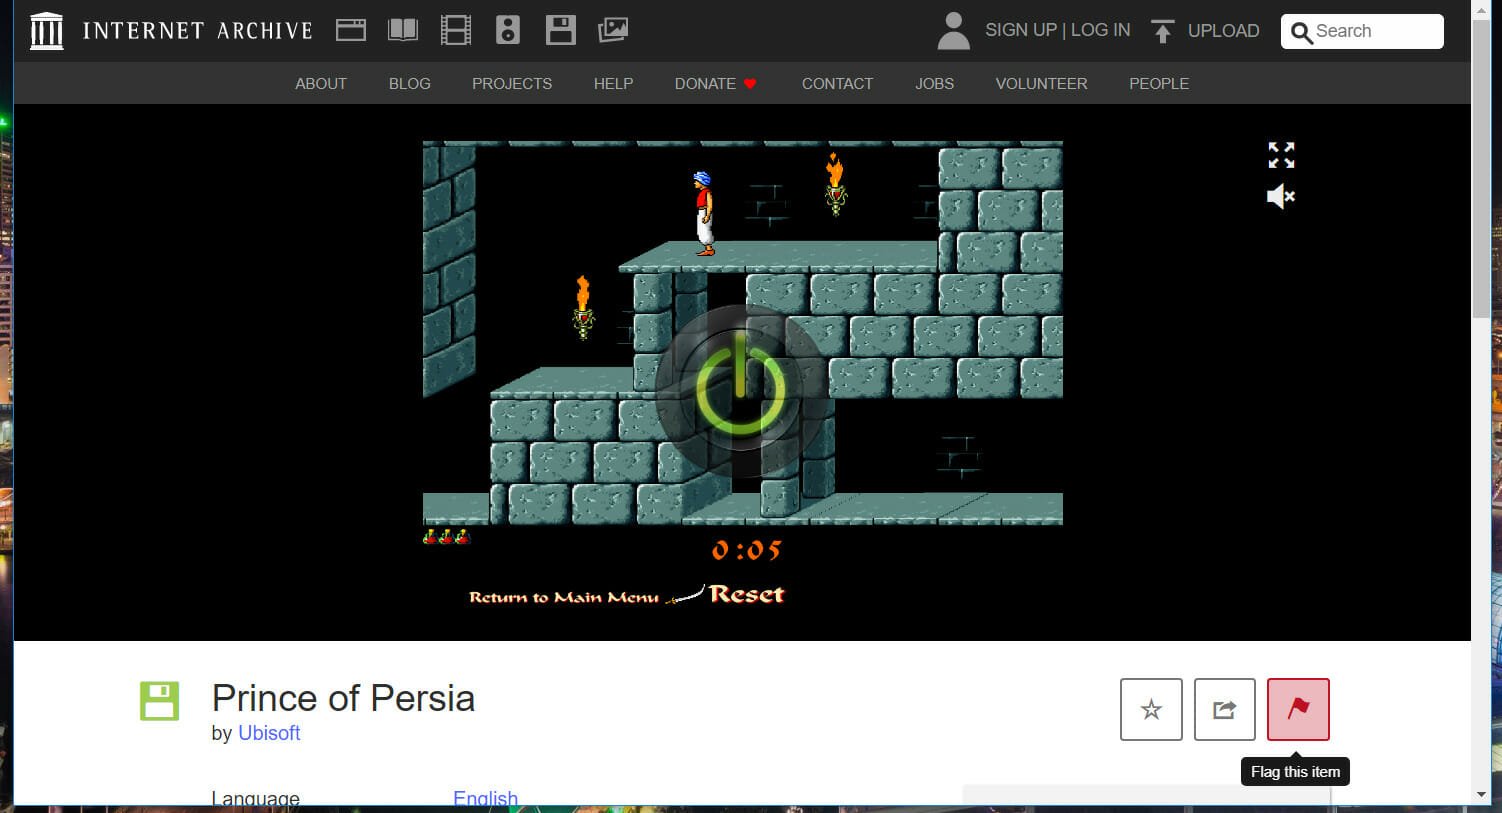 A Flash game on Internet Archive how to play adobe flash games without adobe flash